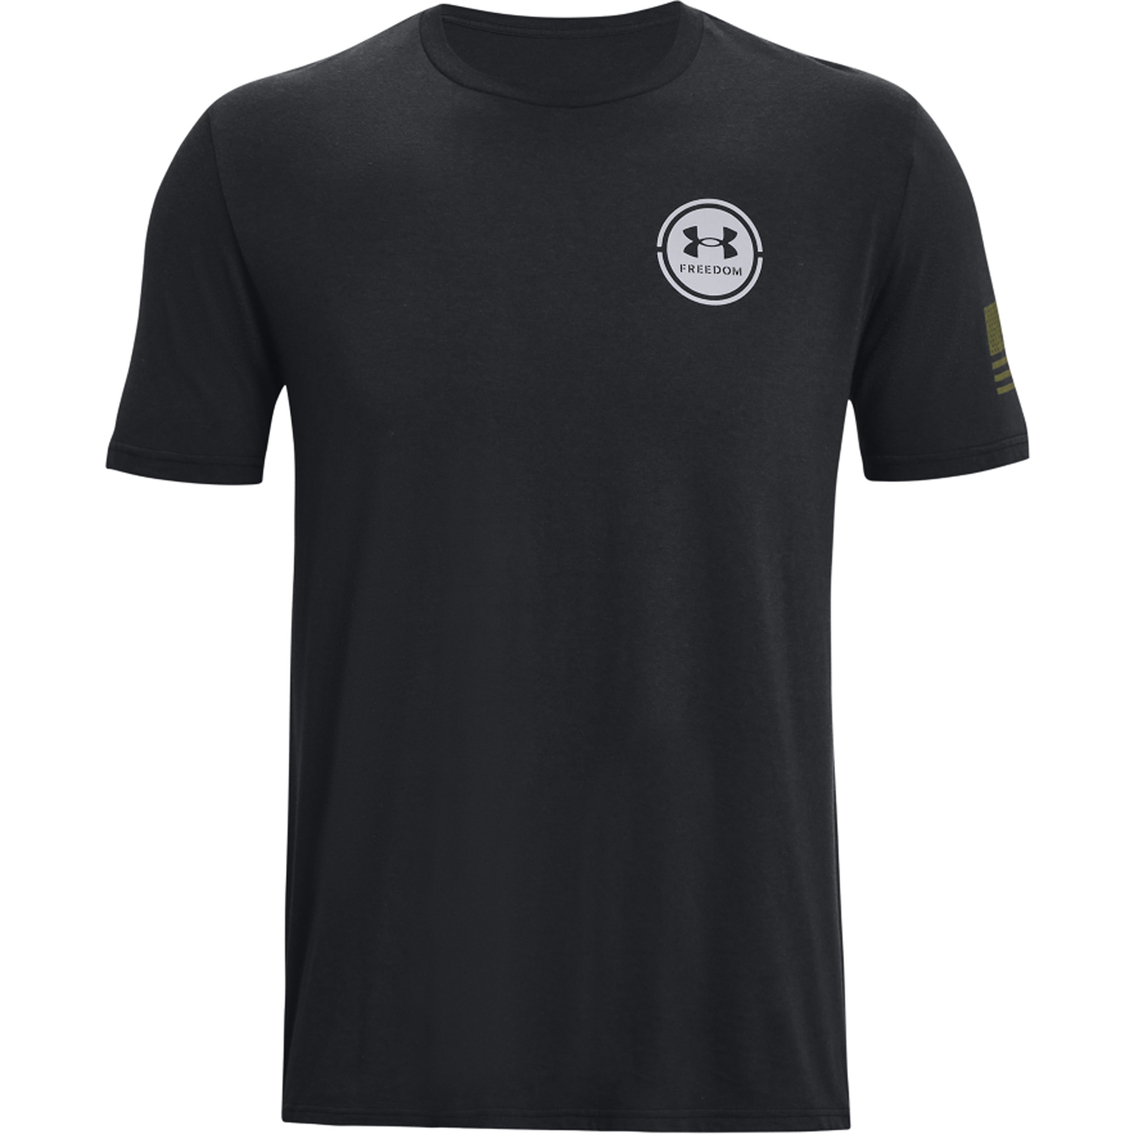 Under Armour Men's Tac Mission Made Tee - Image 5 of 6